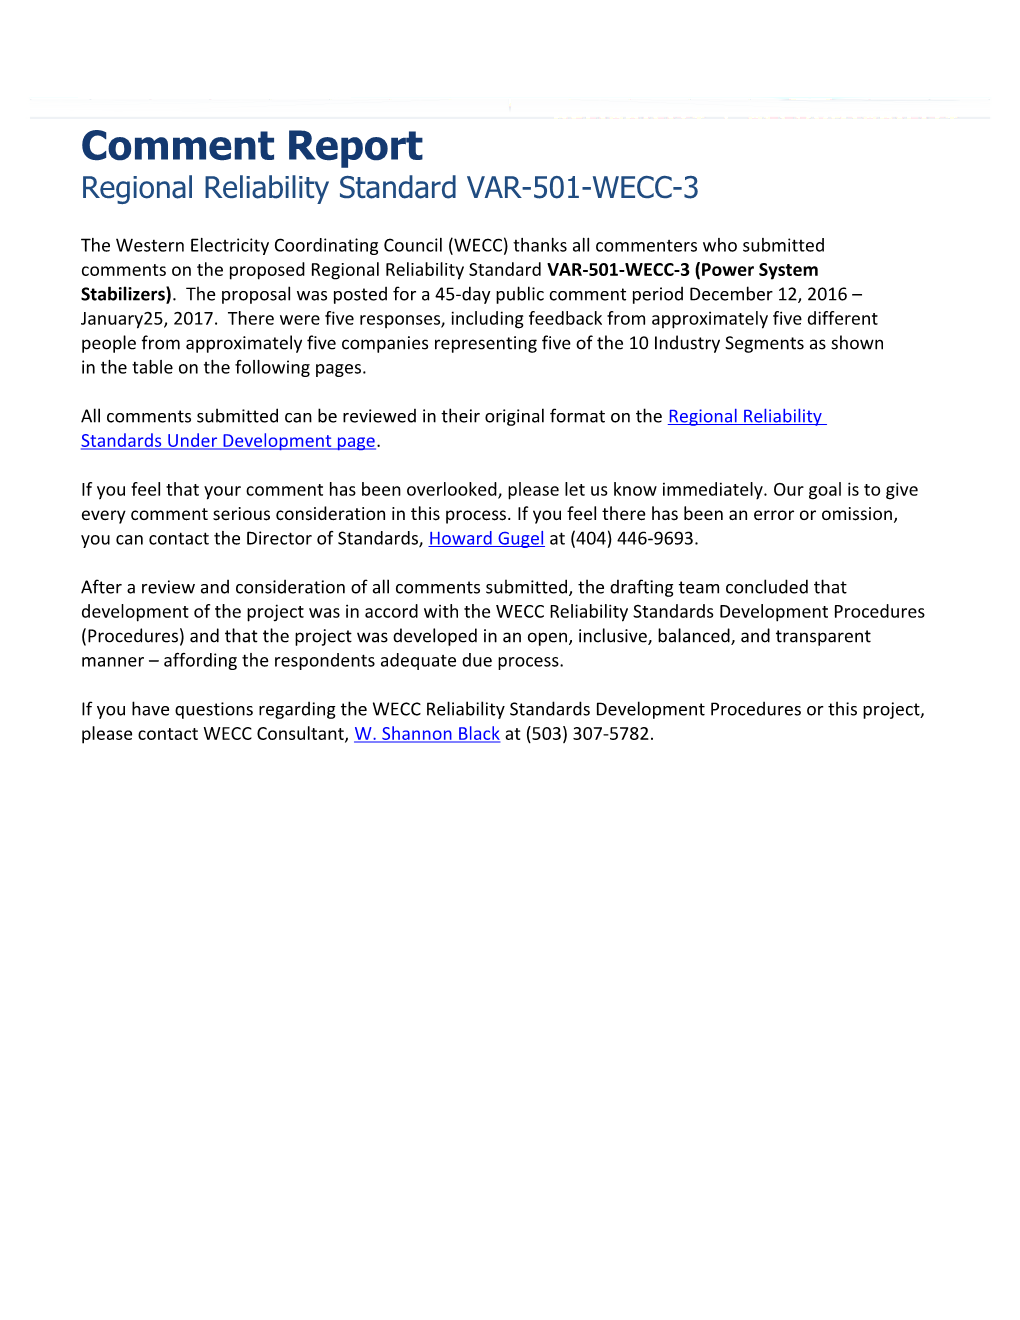 WECC-0107 Posting 1 VAR-501-WECC-2 Response to Comments at NERC 8-4-2015 Through 9-17-2015